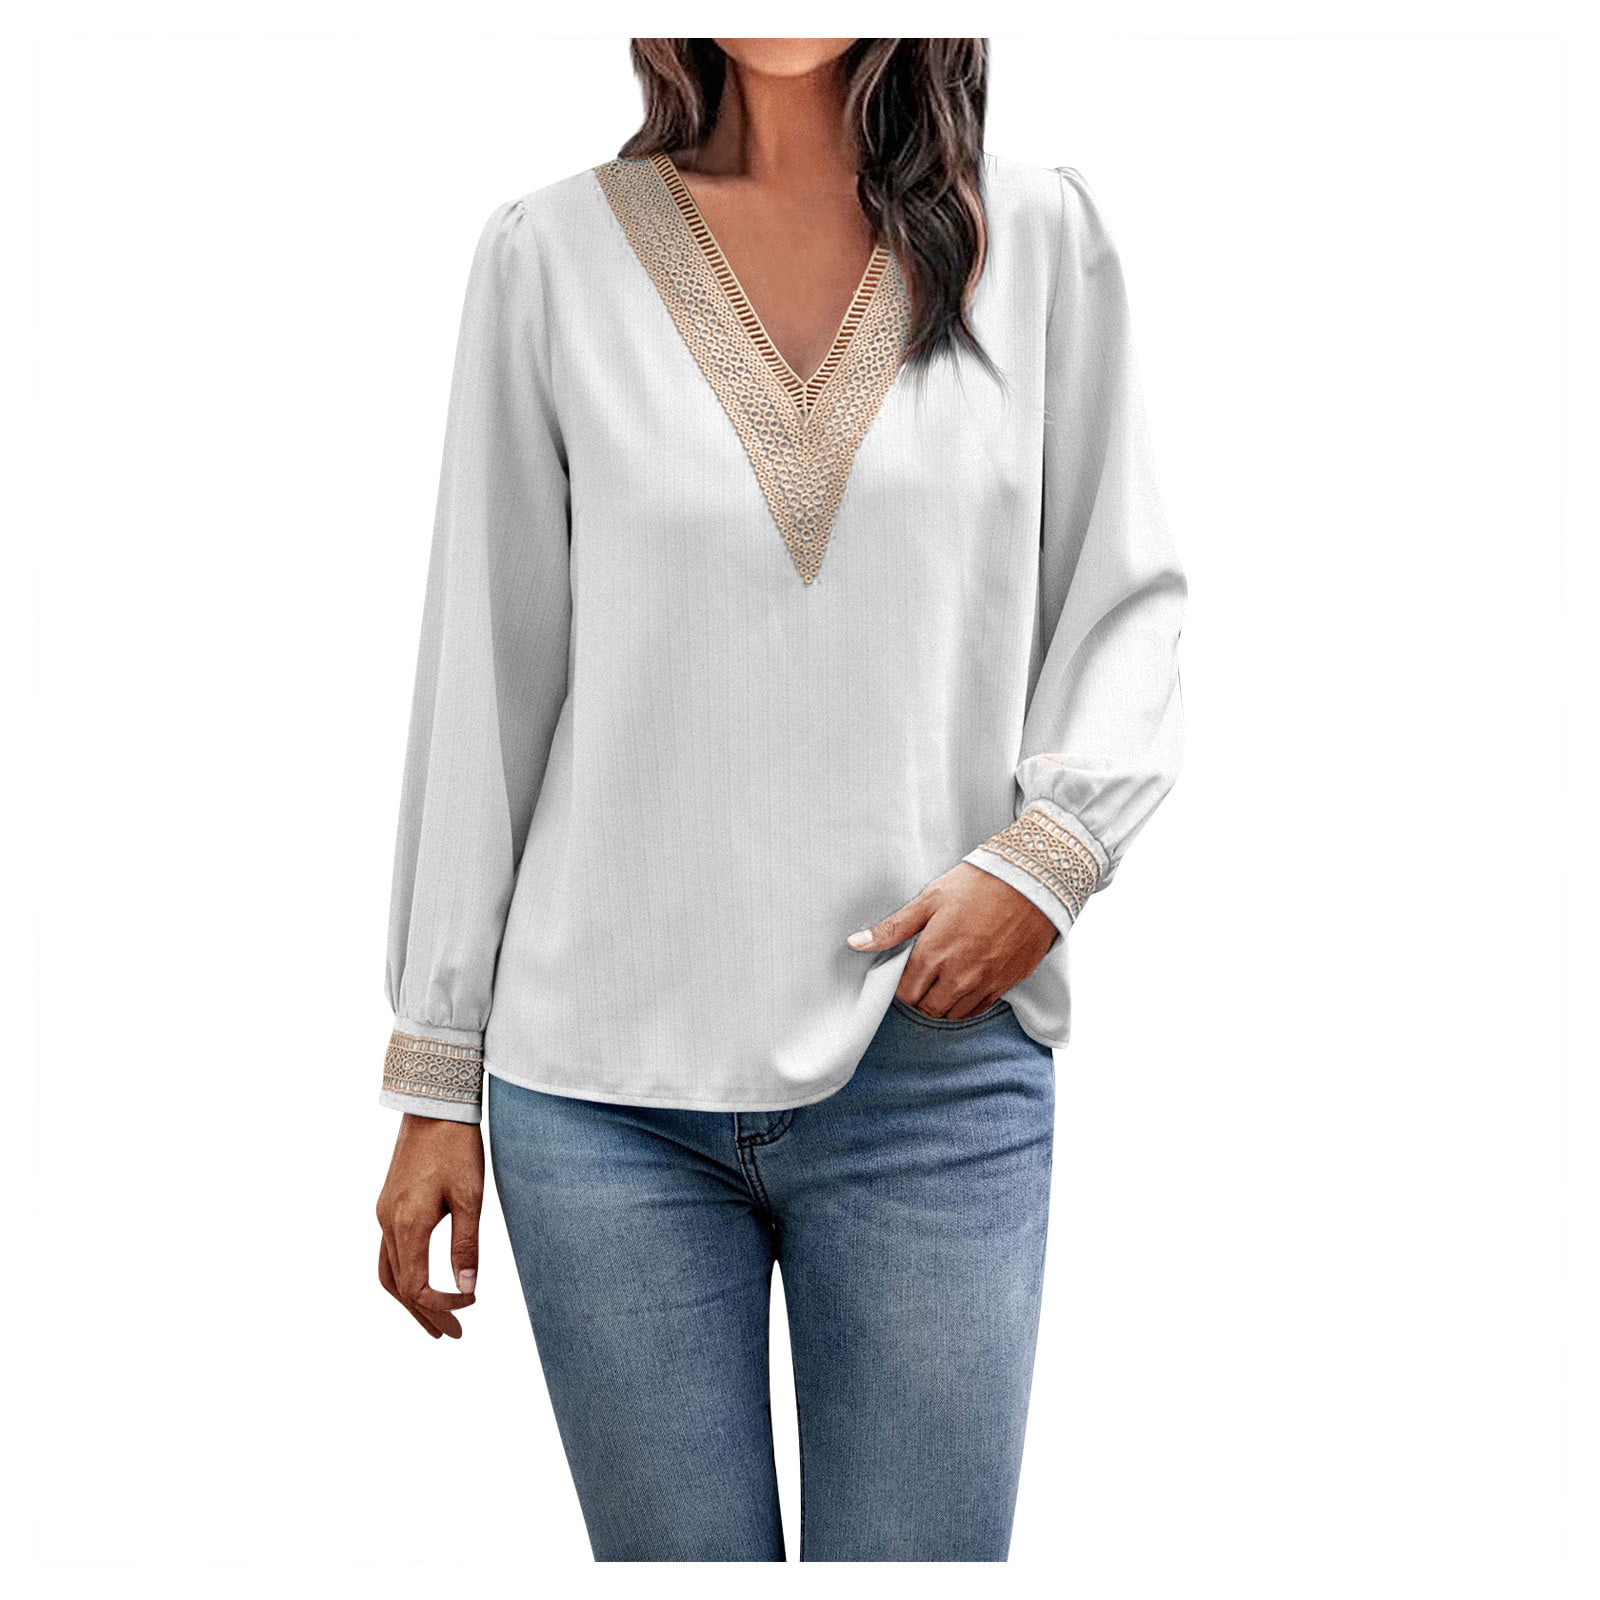 T Shirts, Long Sleeve Blouse Blusas Casuales De Women's Autumn And Winter Fashion Sexy Solid Color V-Neck Long Sleeve Lace Top Saudacdn Women Button Shirts Neck Crop Top(White,X-Large) - Walmart.com